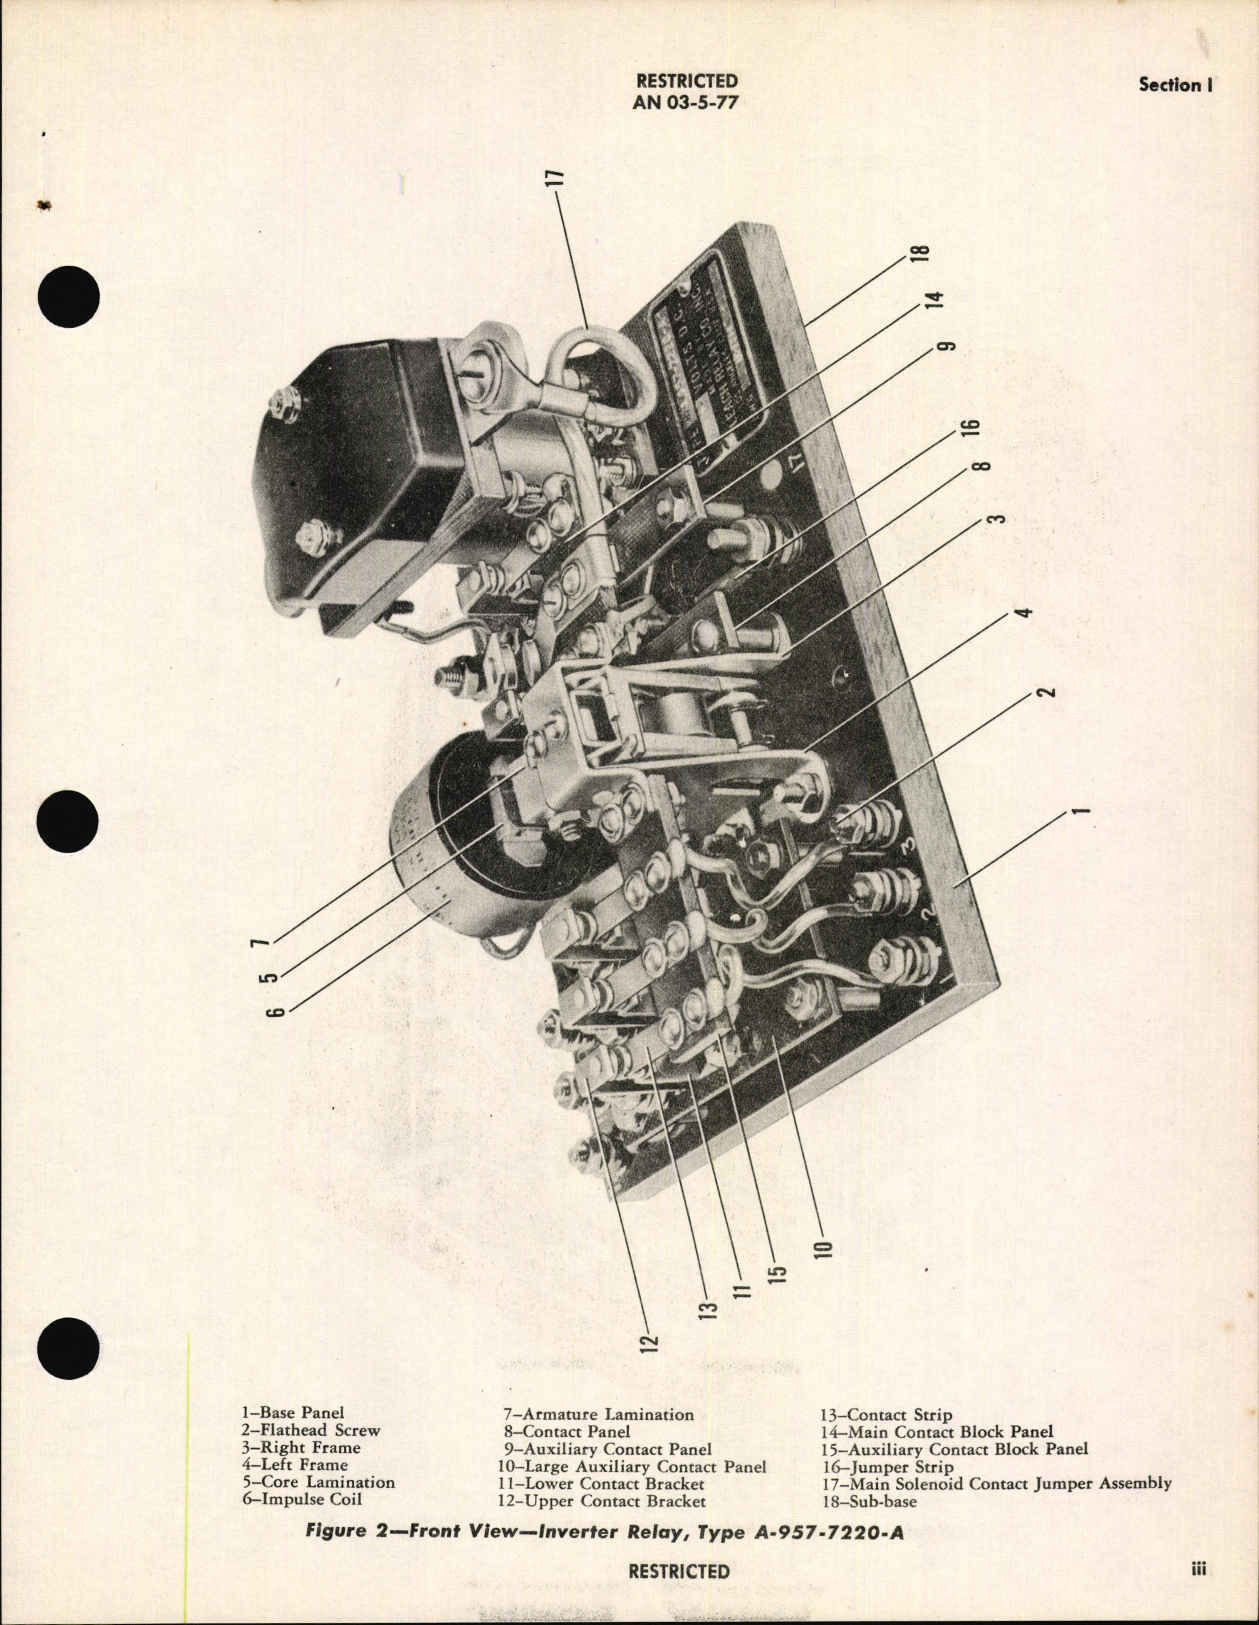 Sample page 5 from AirCorps Library document: Overhaul Instructions with Parts Catalog for Inverter Relay A-957-7220-A